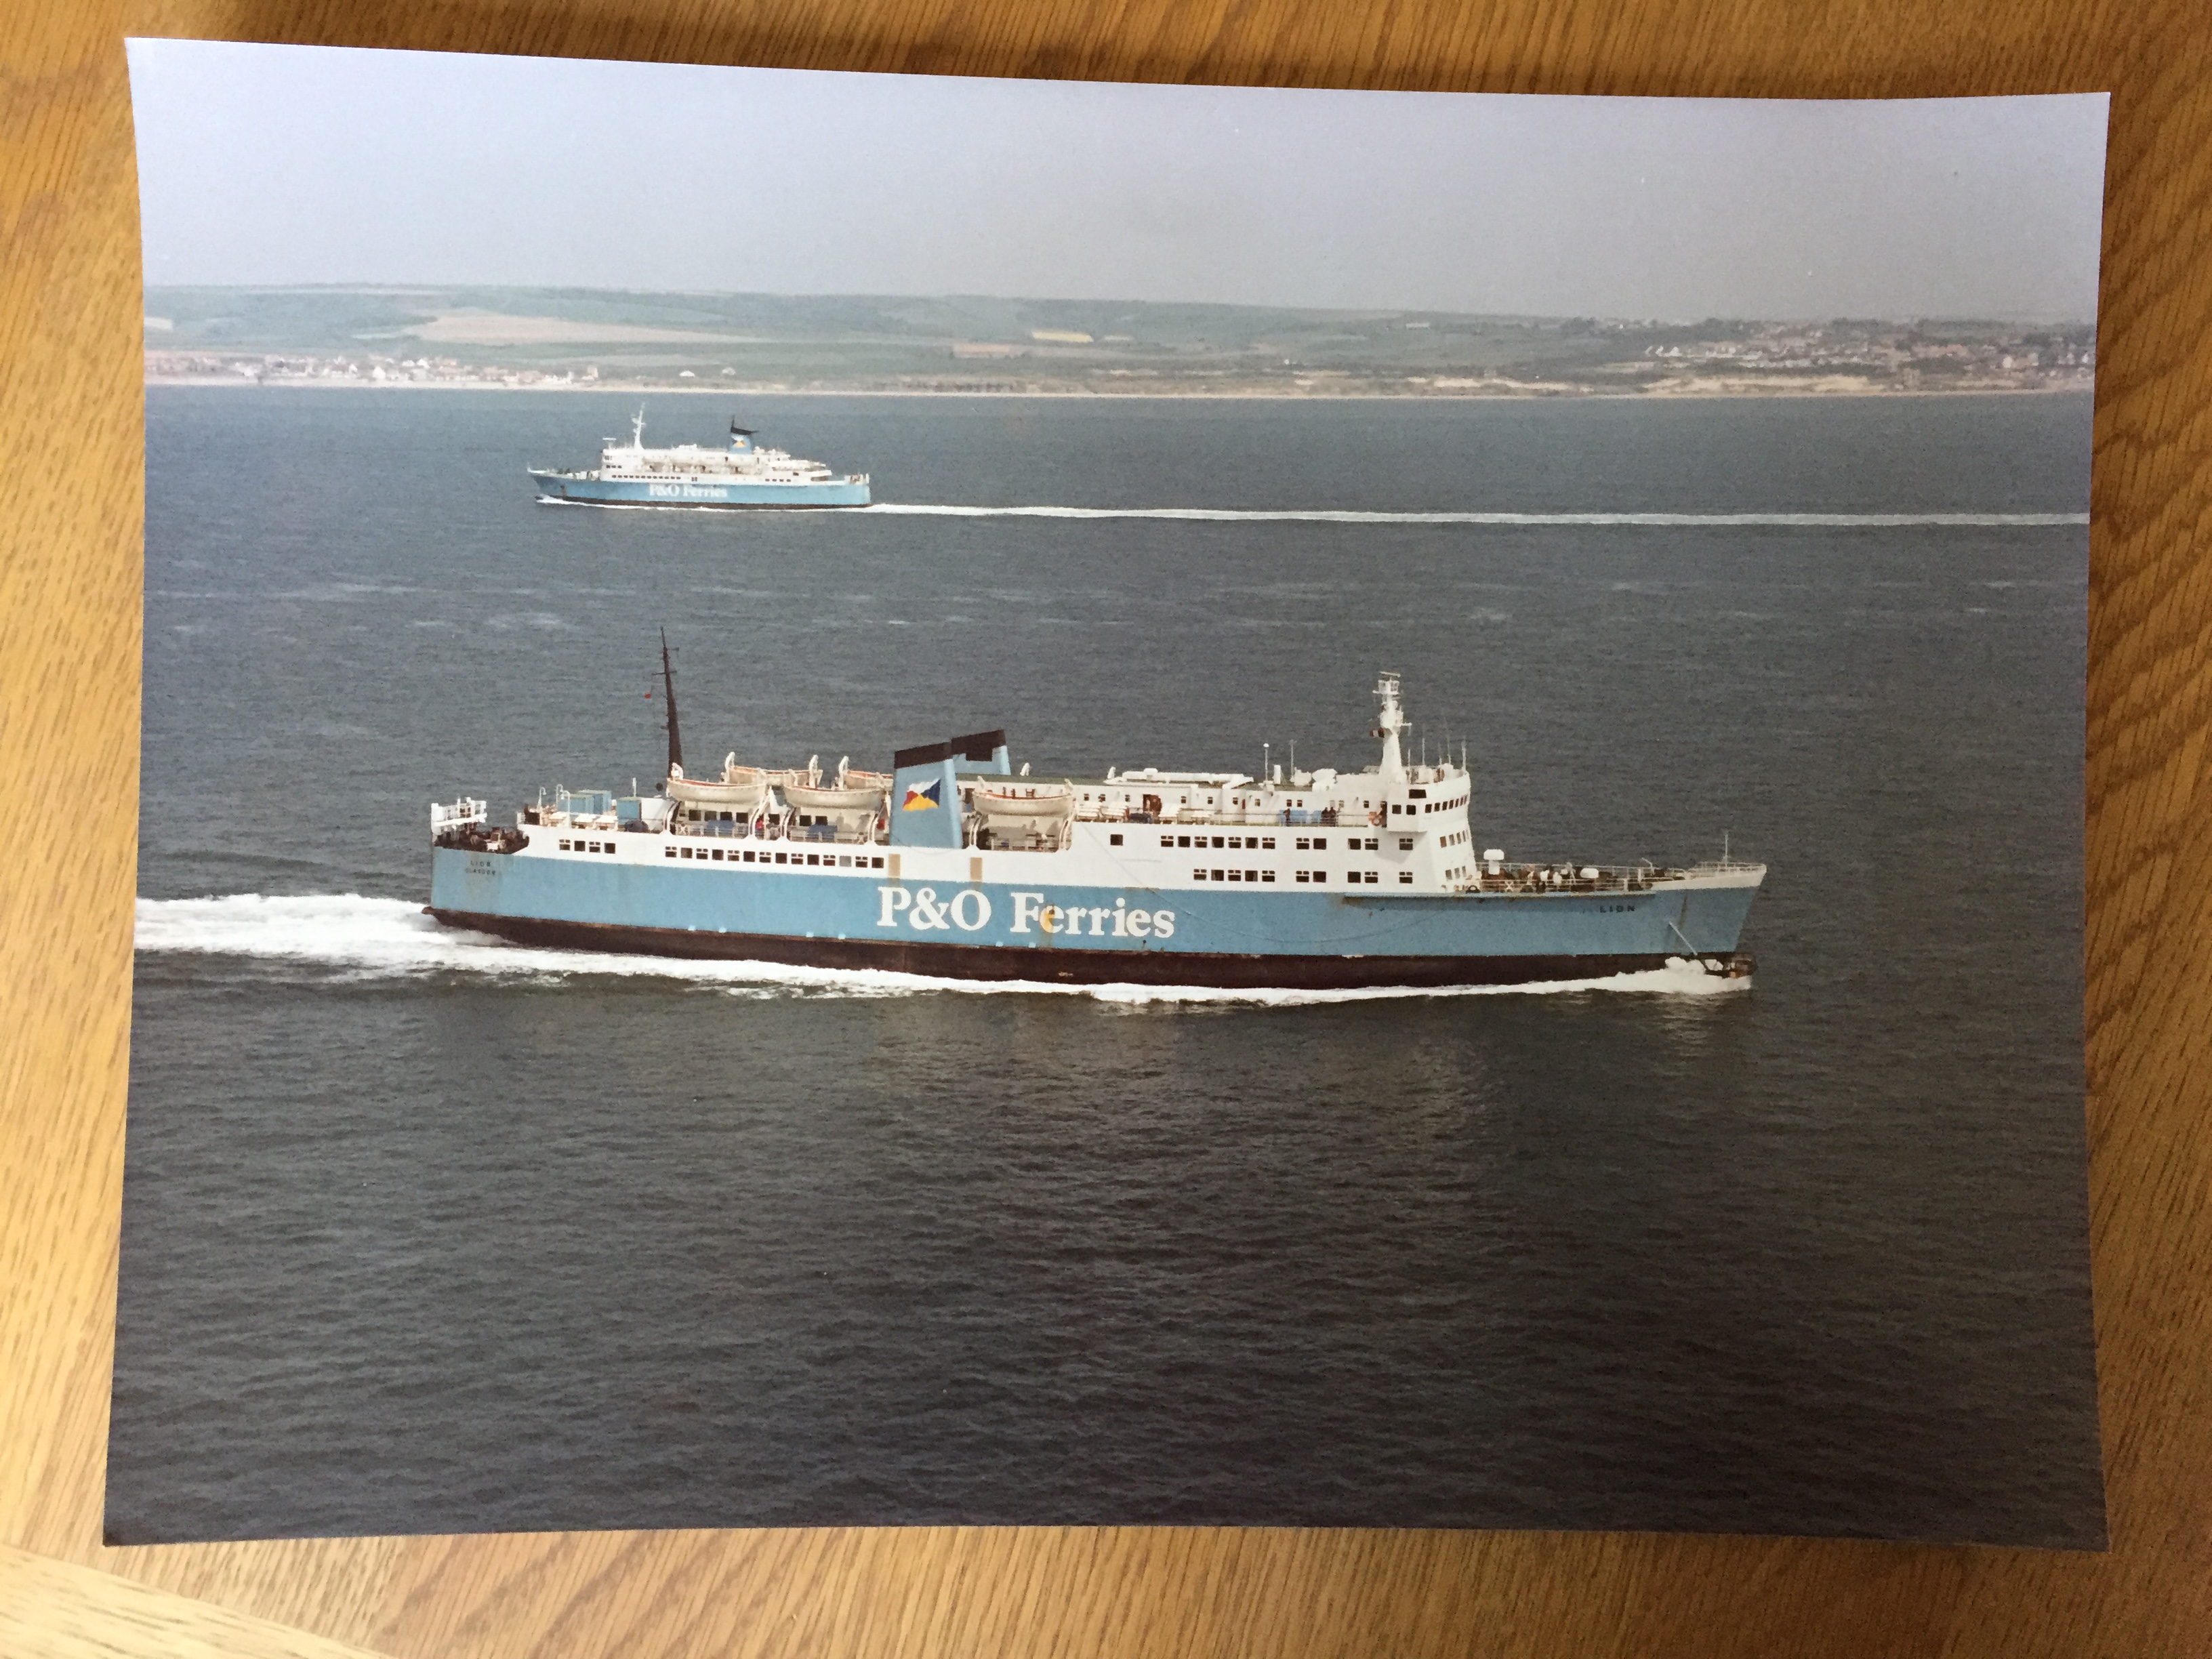 LARGE SIZE COLOUR PHOTOGRAPH OF THE P&O SEAGOING FERRY VESSEL LION